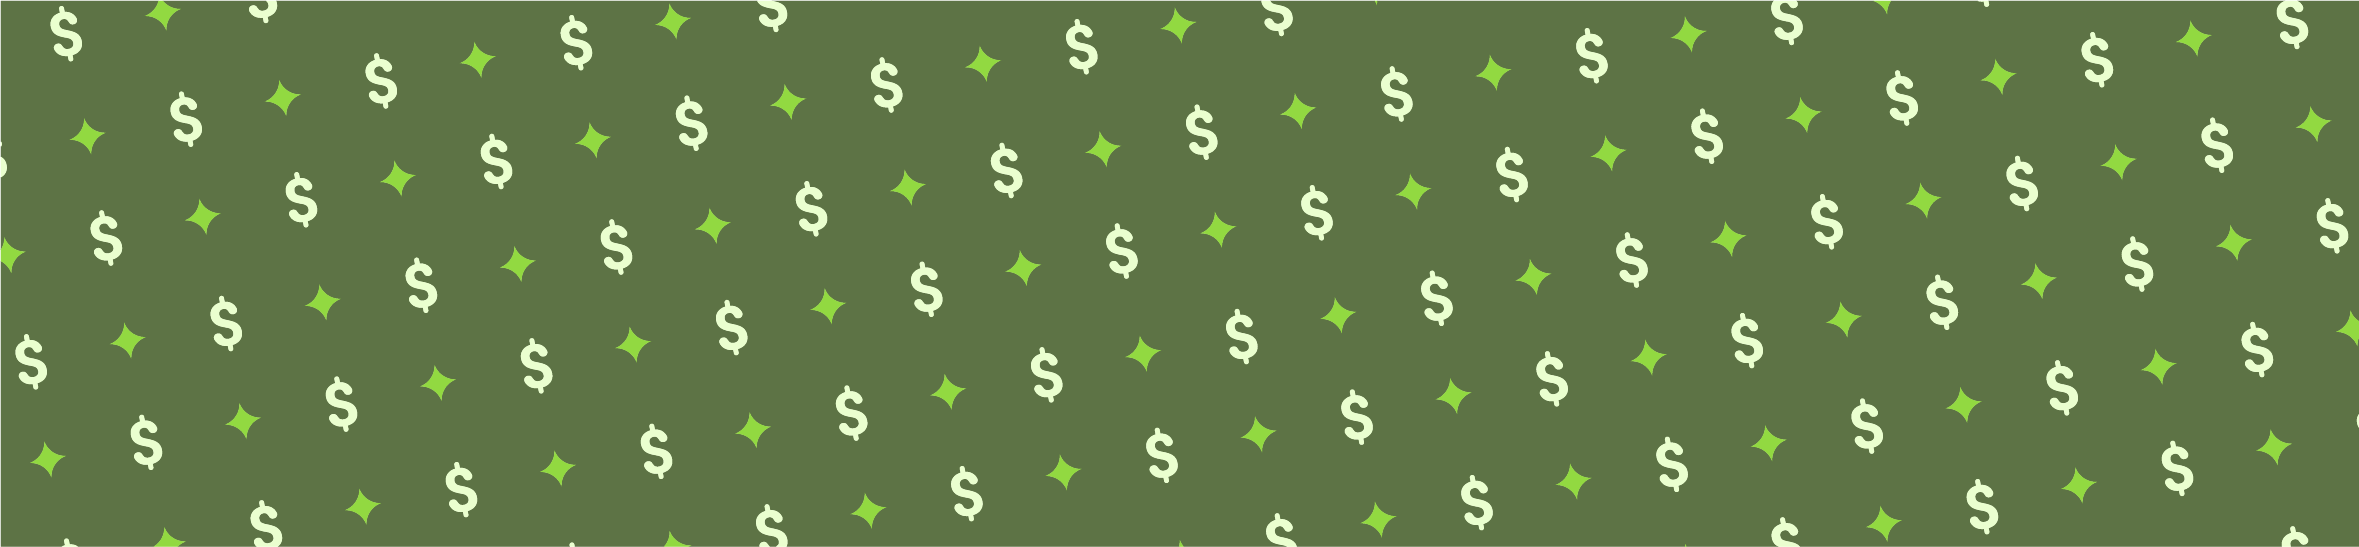 image of repeating dollar signs and stars